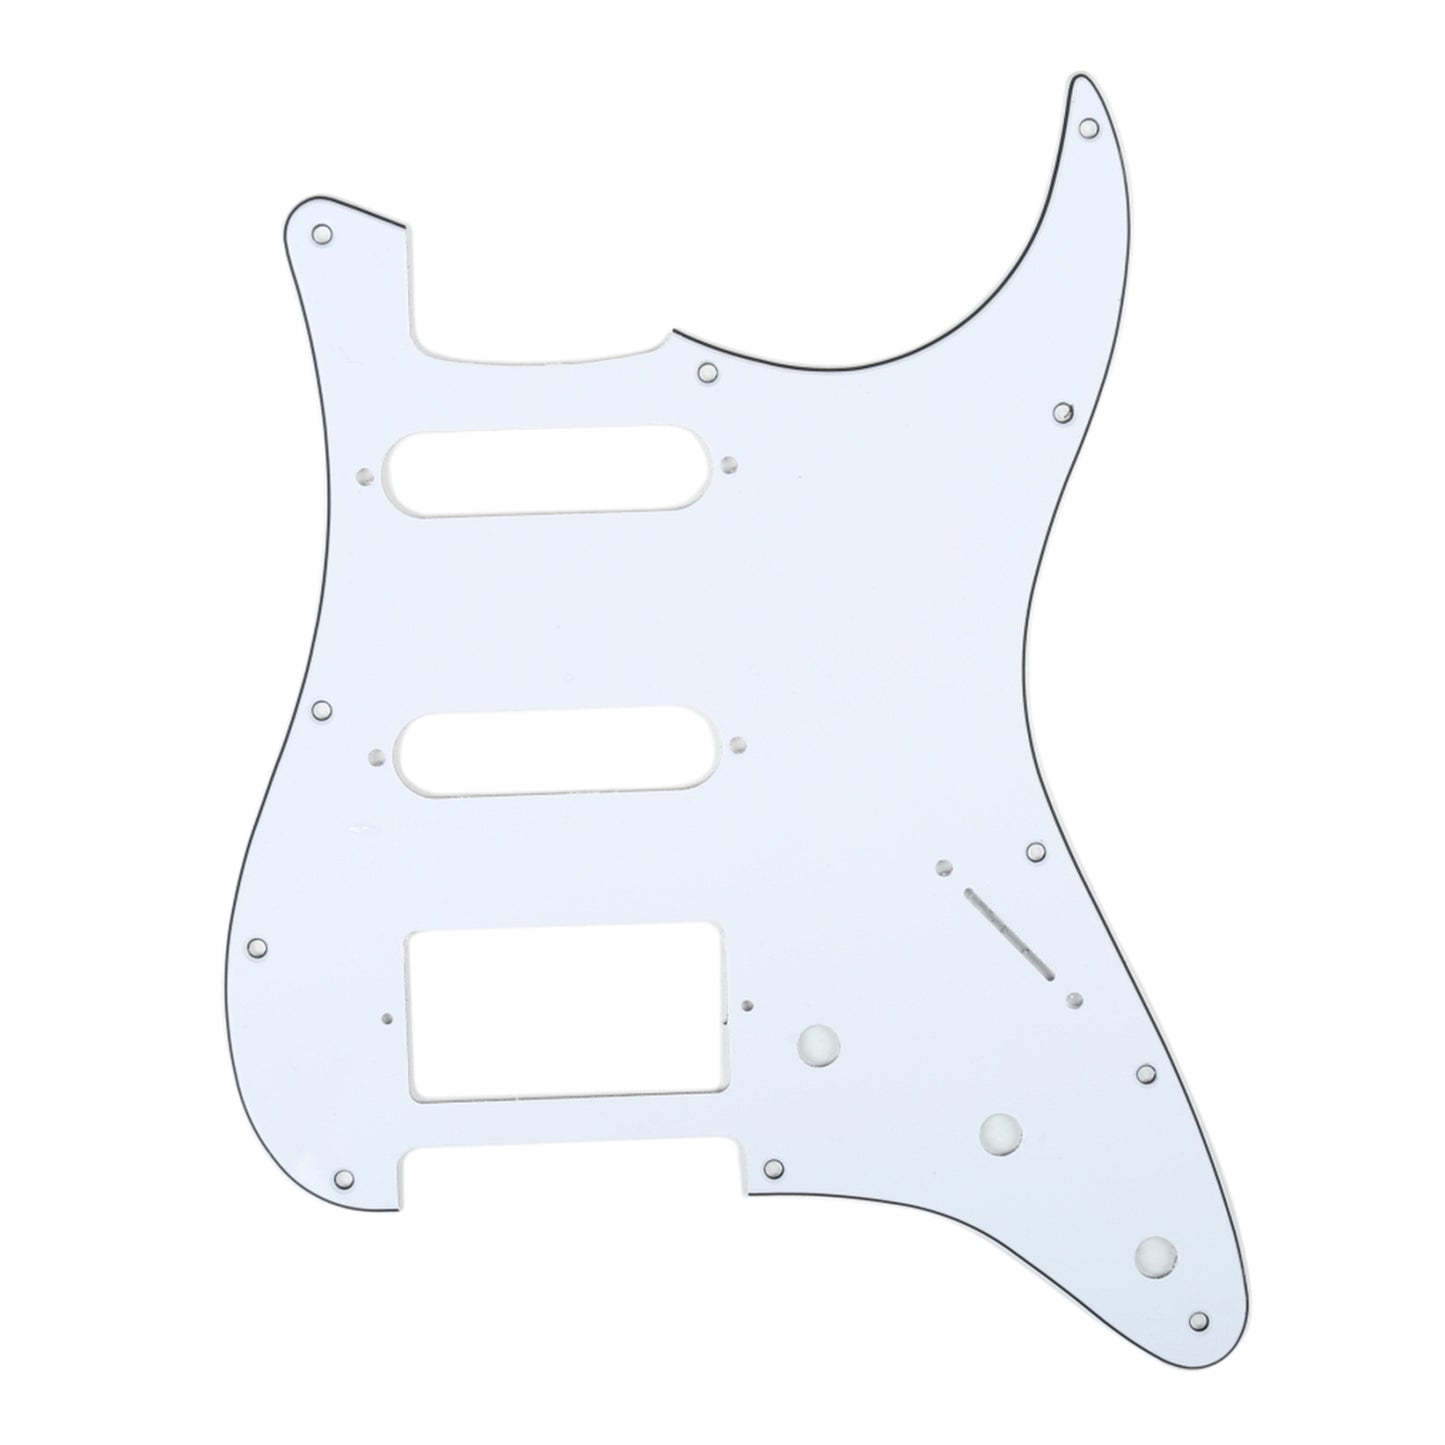 Musiclily HSS 11 Hole Guitar Strat Pickguard for Fender USA/Mexican Made Standard Stratocaster Modern Style,3Ply White